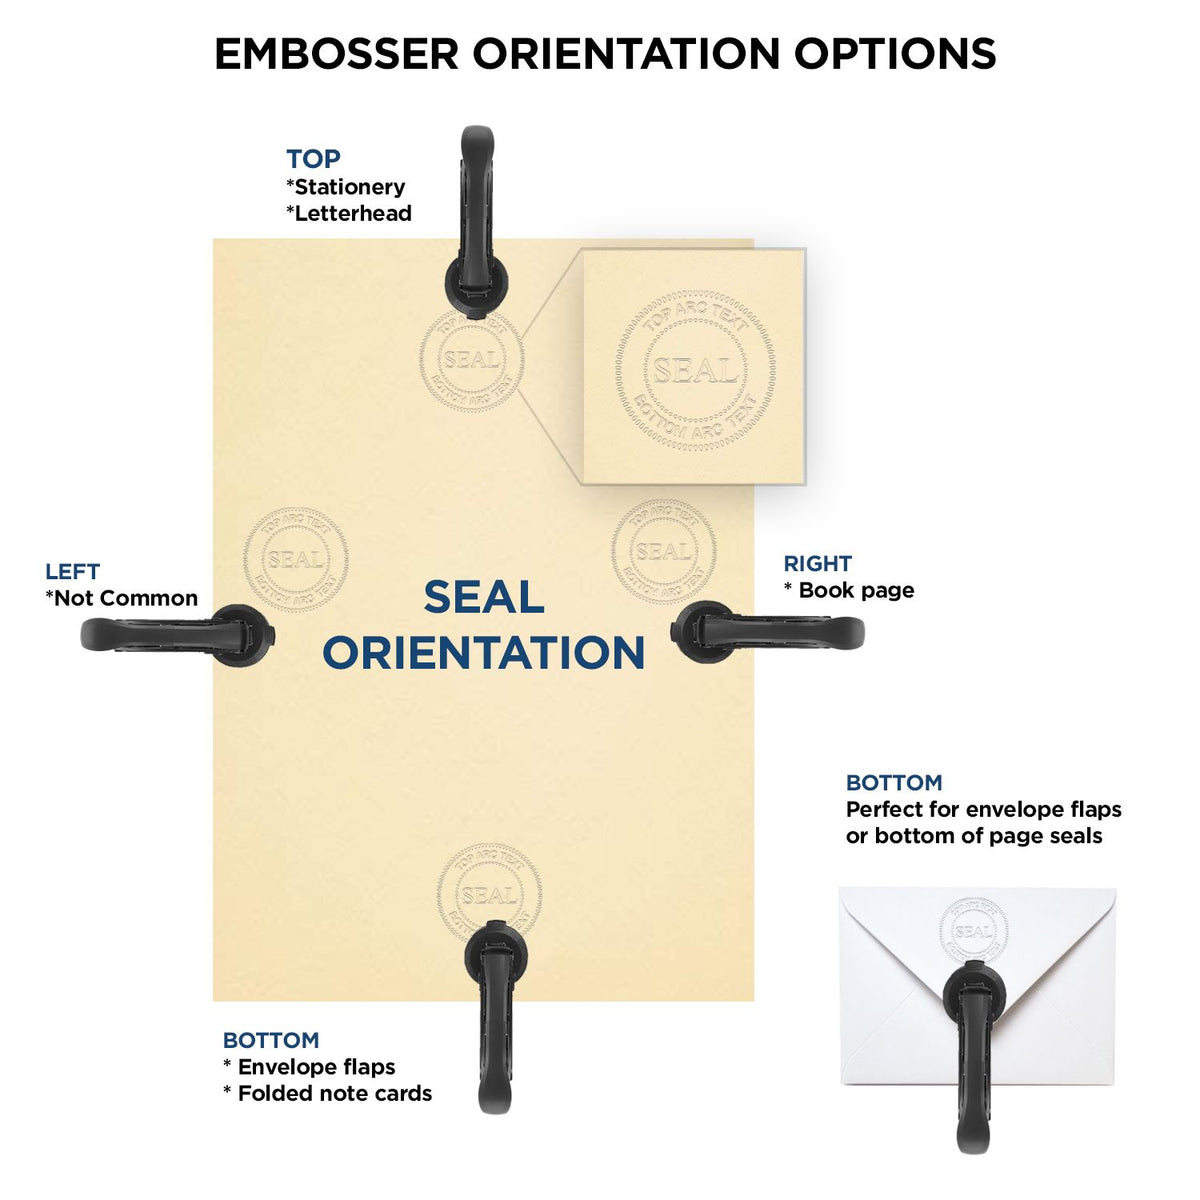 An infographic for the Soft Pocket Minnesota Landscape Architect Embosser showing embosser orientation, this is showing examples of a top, bottom, right and left insert.